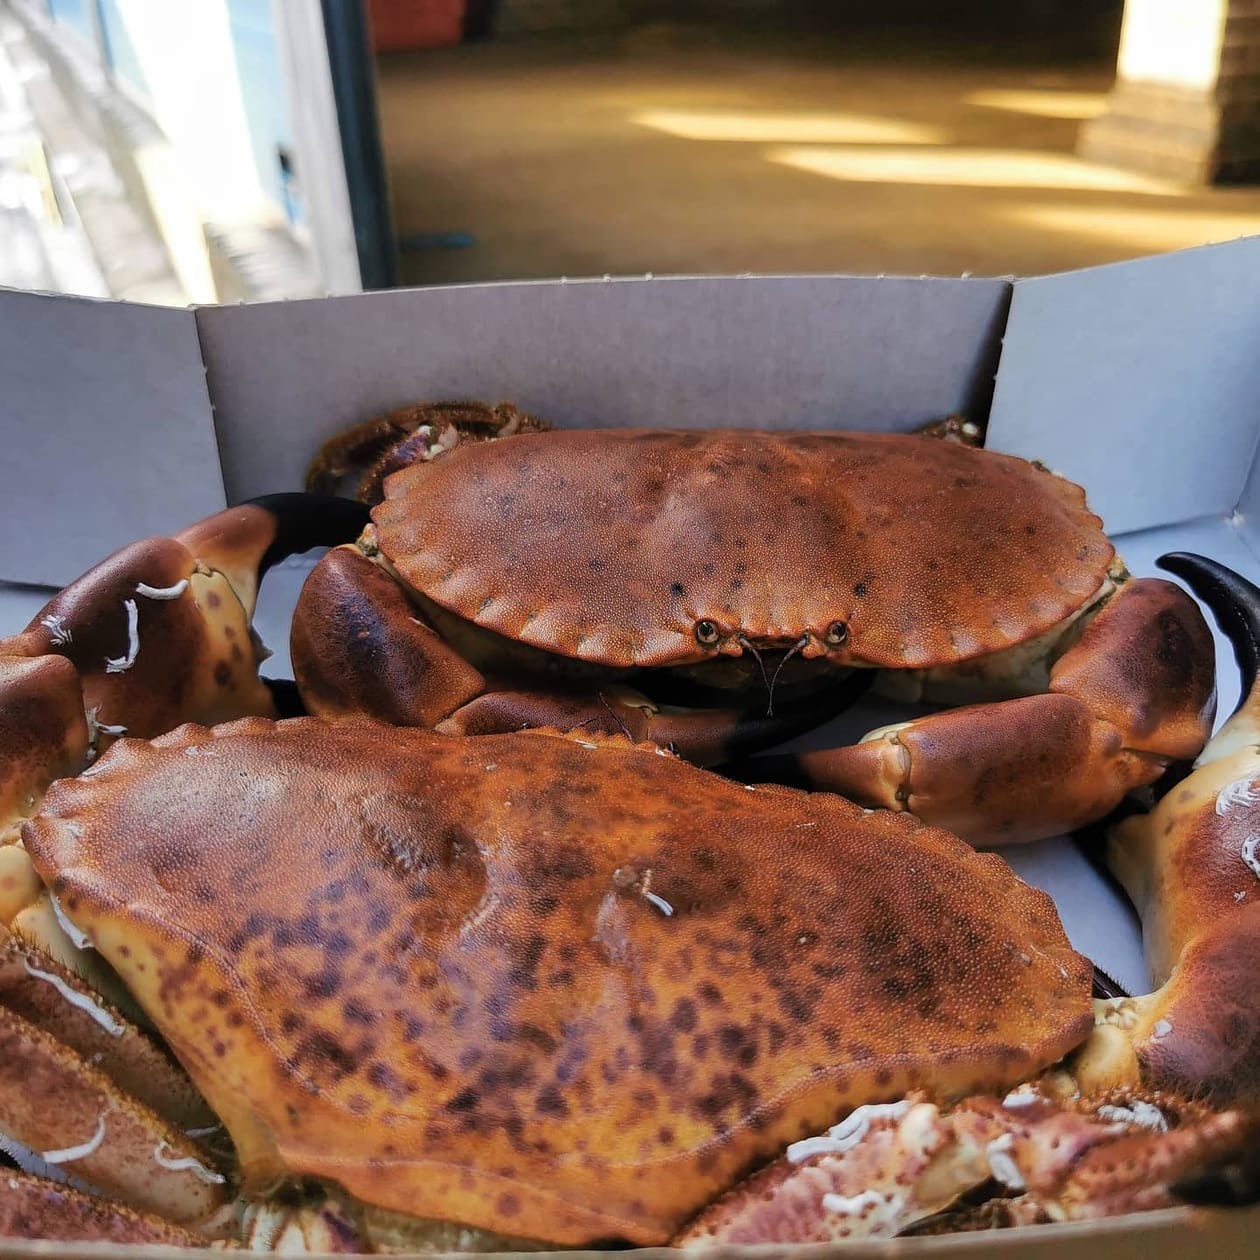 Enjoy some beautiful live Cornish Crab. We deliver to Bristol, Somerset, Bath, Weston Super Mare, Taunton, Newport, North Somerset, and Gloucestershire. Order your fish and meat with us today, order online or by phone.